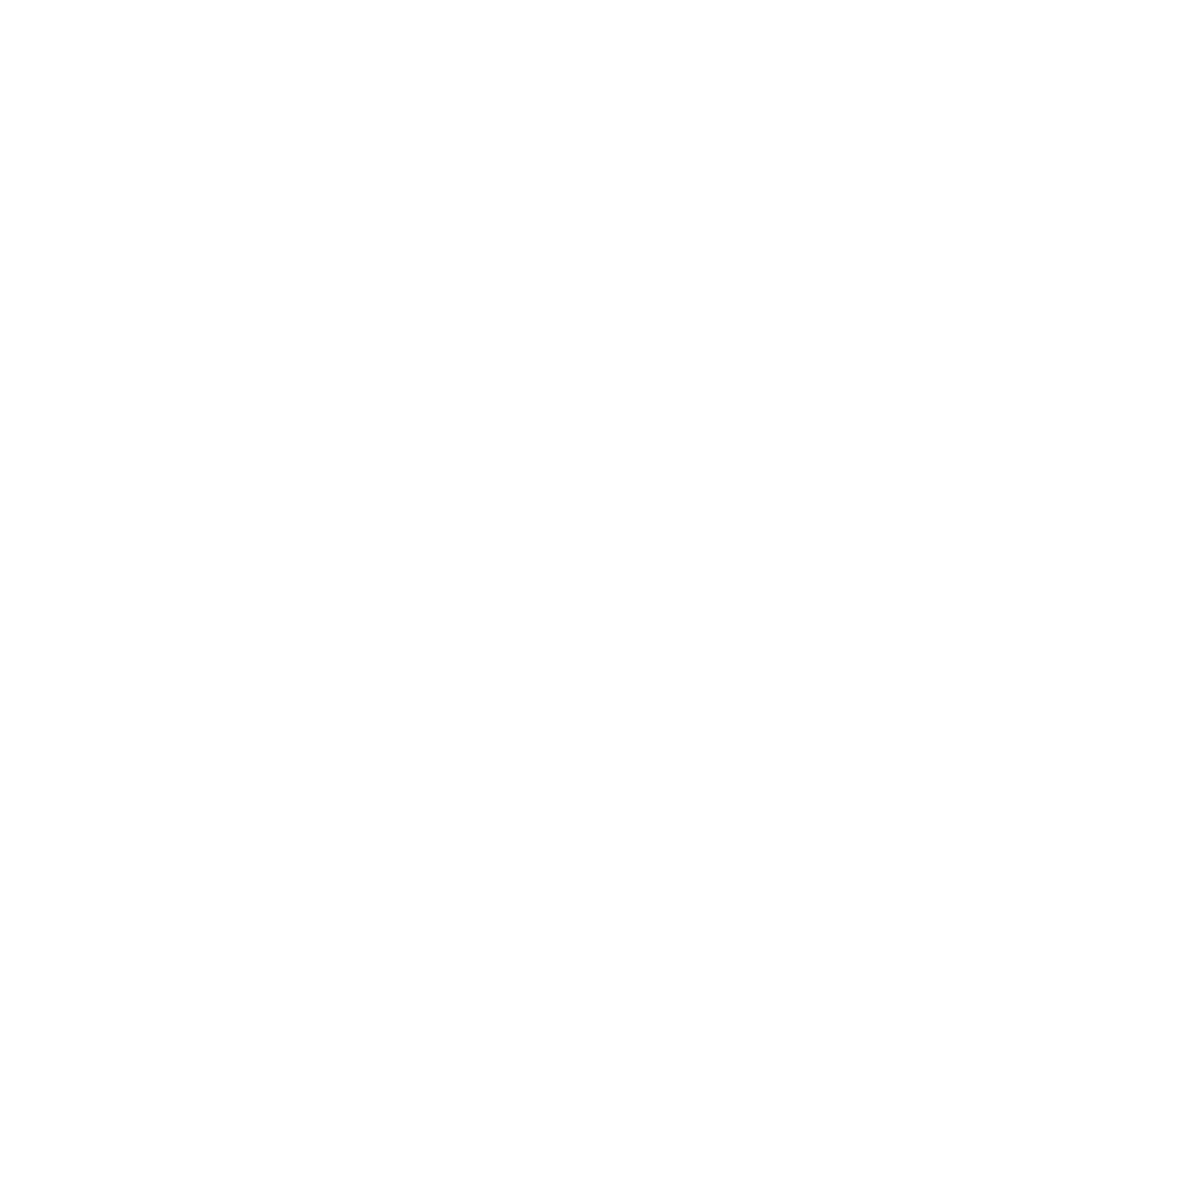 O Channell Designs